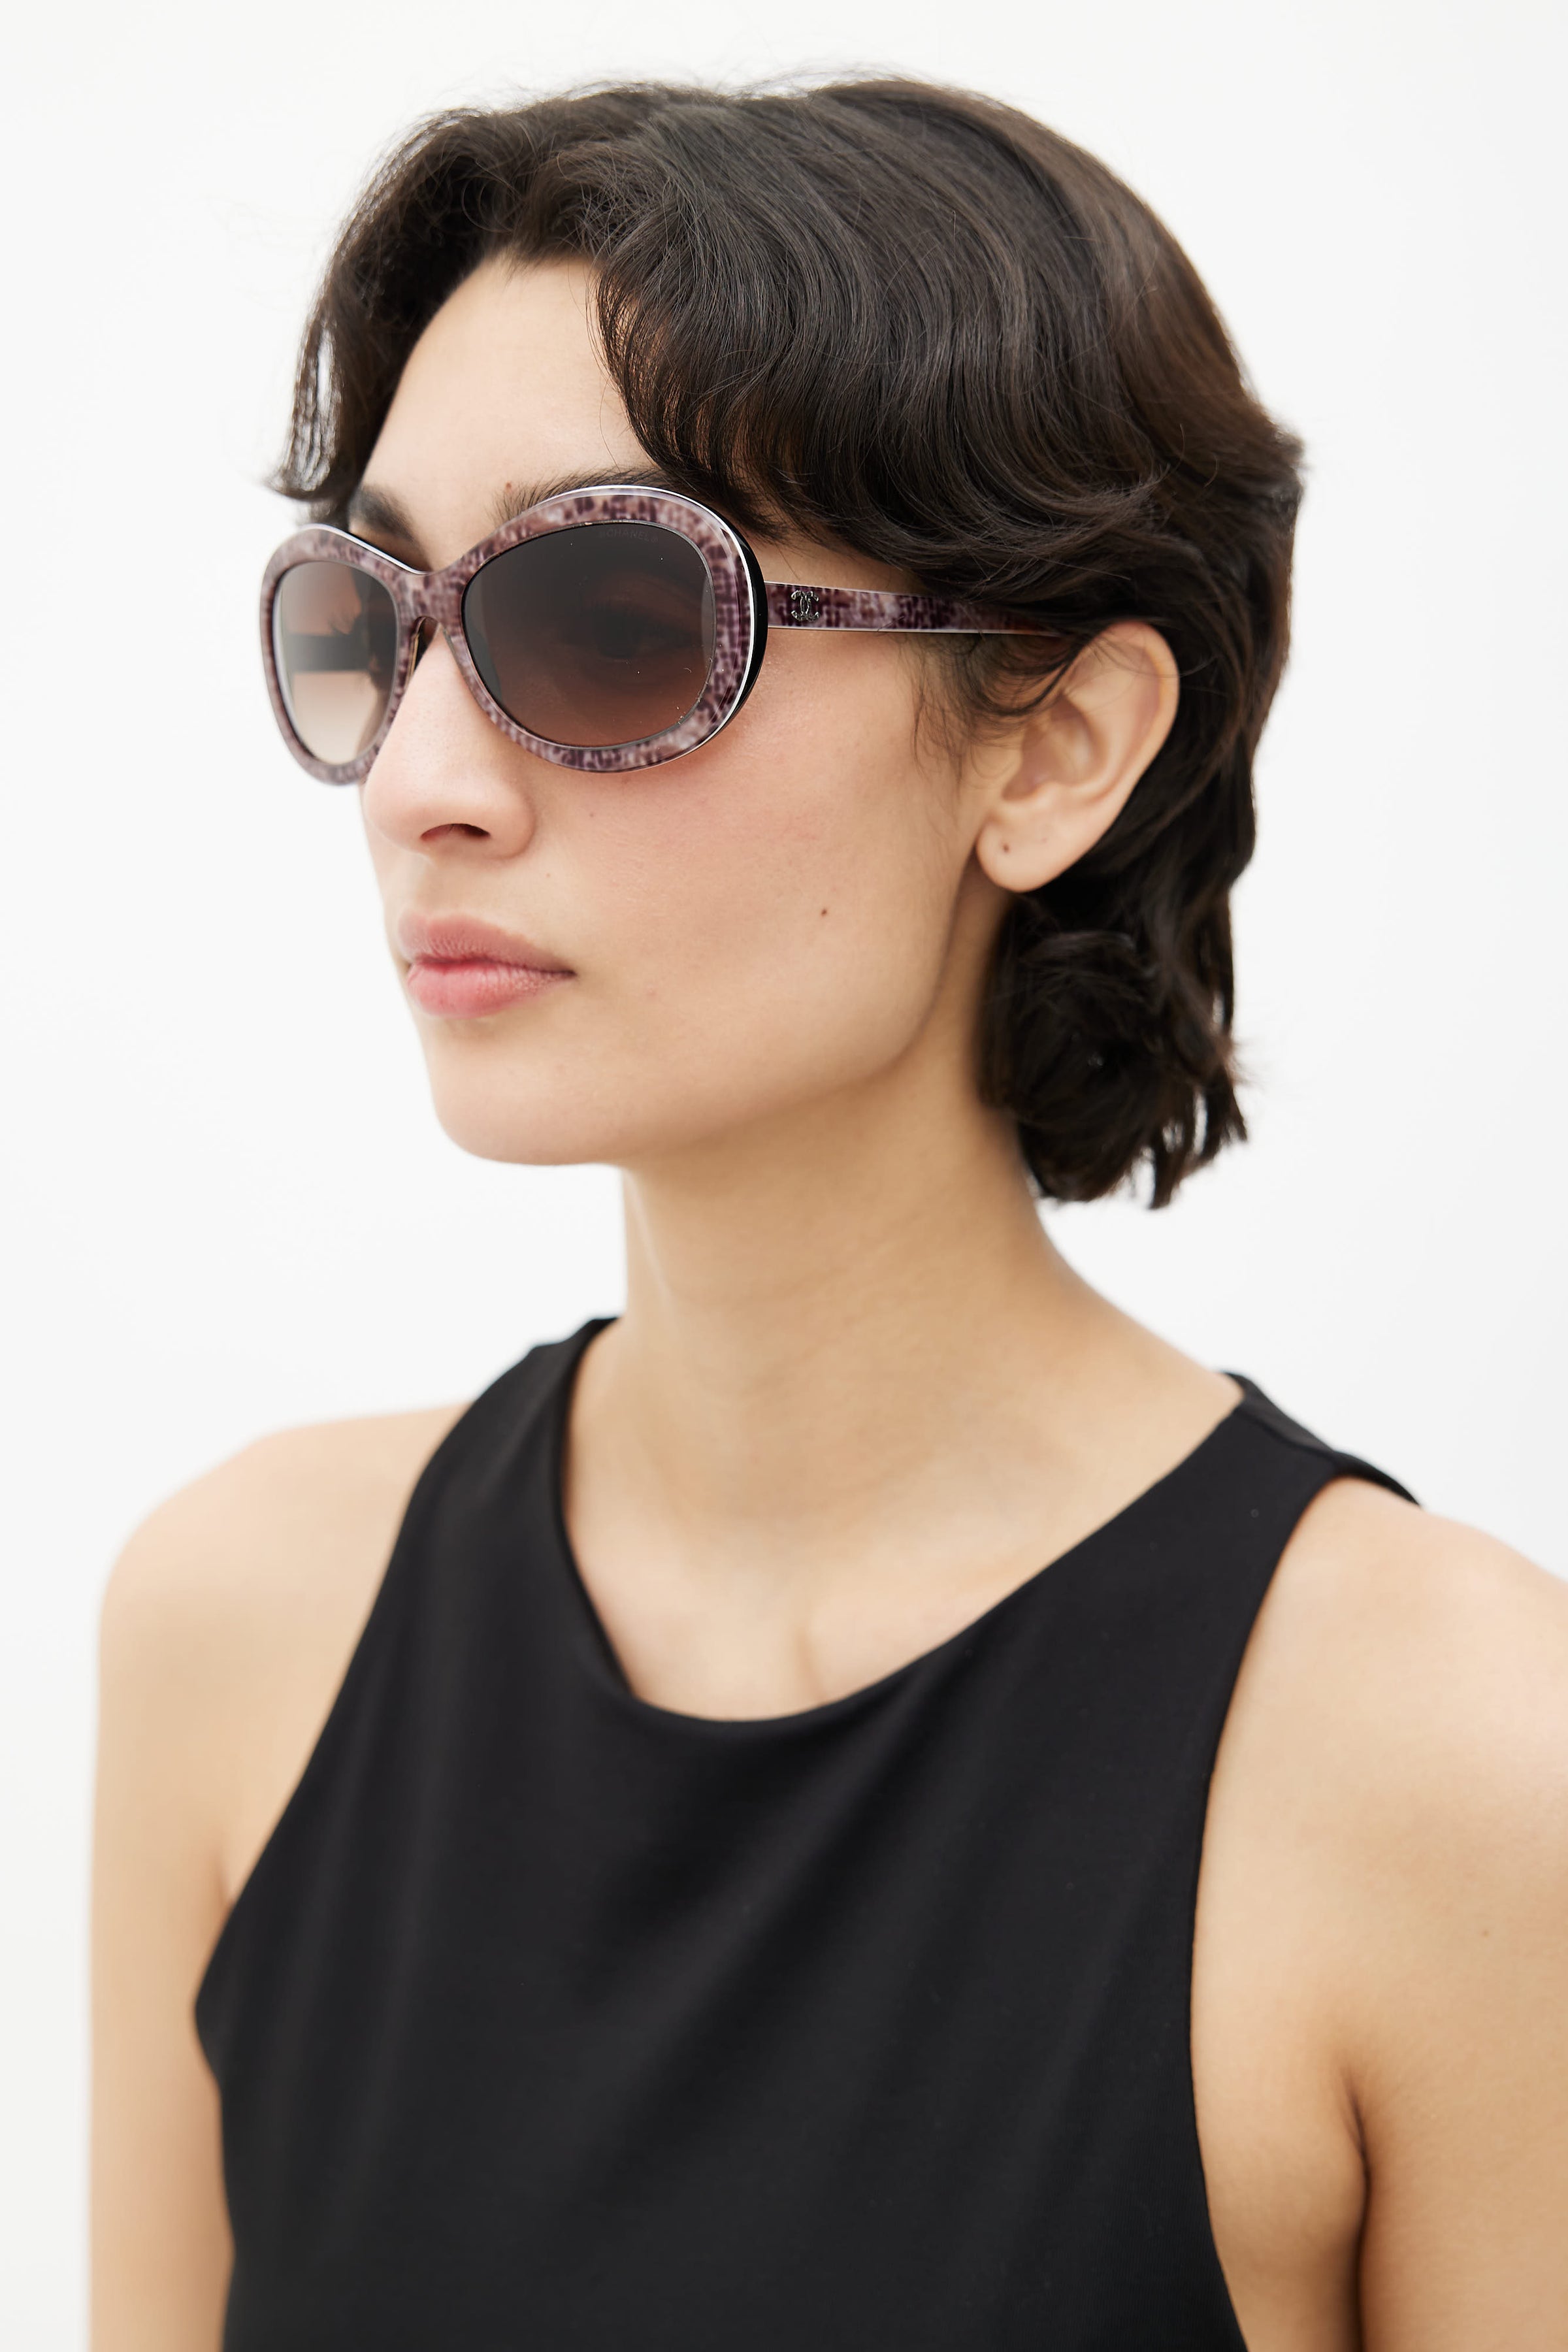 Trendy Chanel oval sunglasses, Style number